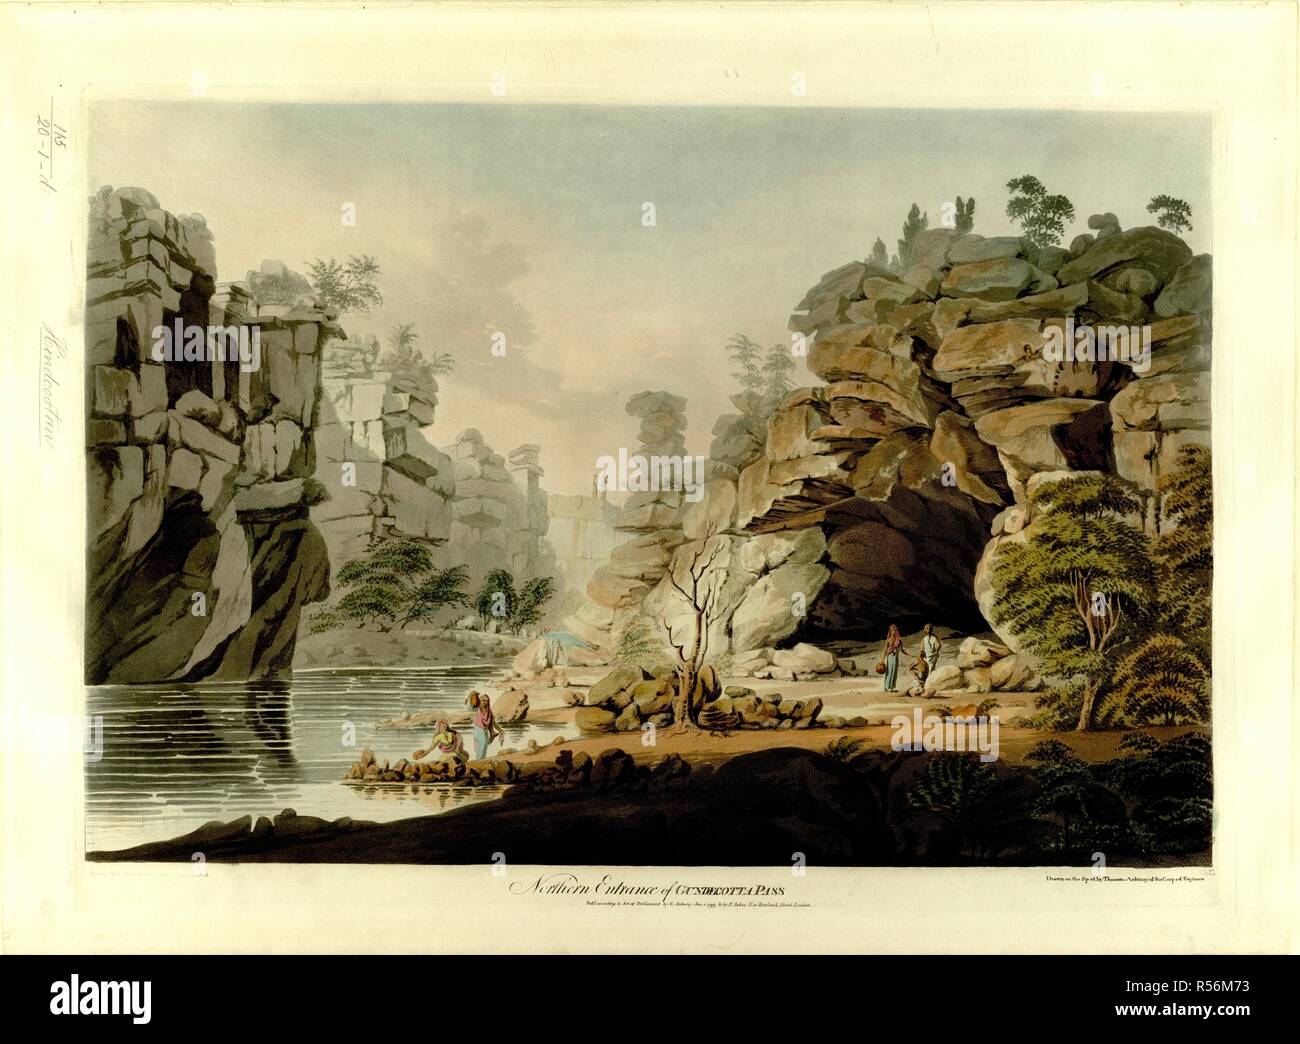 Gandikotta Pass, on the Pennar River; women by a body of water; figures by a cave on the right; rocks and cliffs on either side; the points of a minaret in the distance. Northern Entrance of GUNDECOTTA PASS. [London] ; [Bengal] : Published according to Act of Parliament Jan 1st 1799 by Thos. Anburey Bengal & by F. Jukes, Howland Street London, [January 1 1799]. Source: Maps K.Top.115.20.1.d. Language: English. Stock Photo